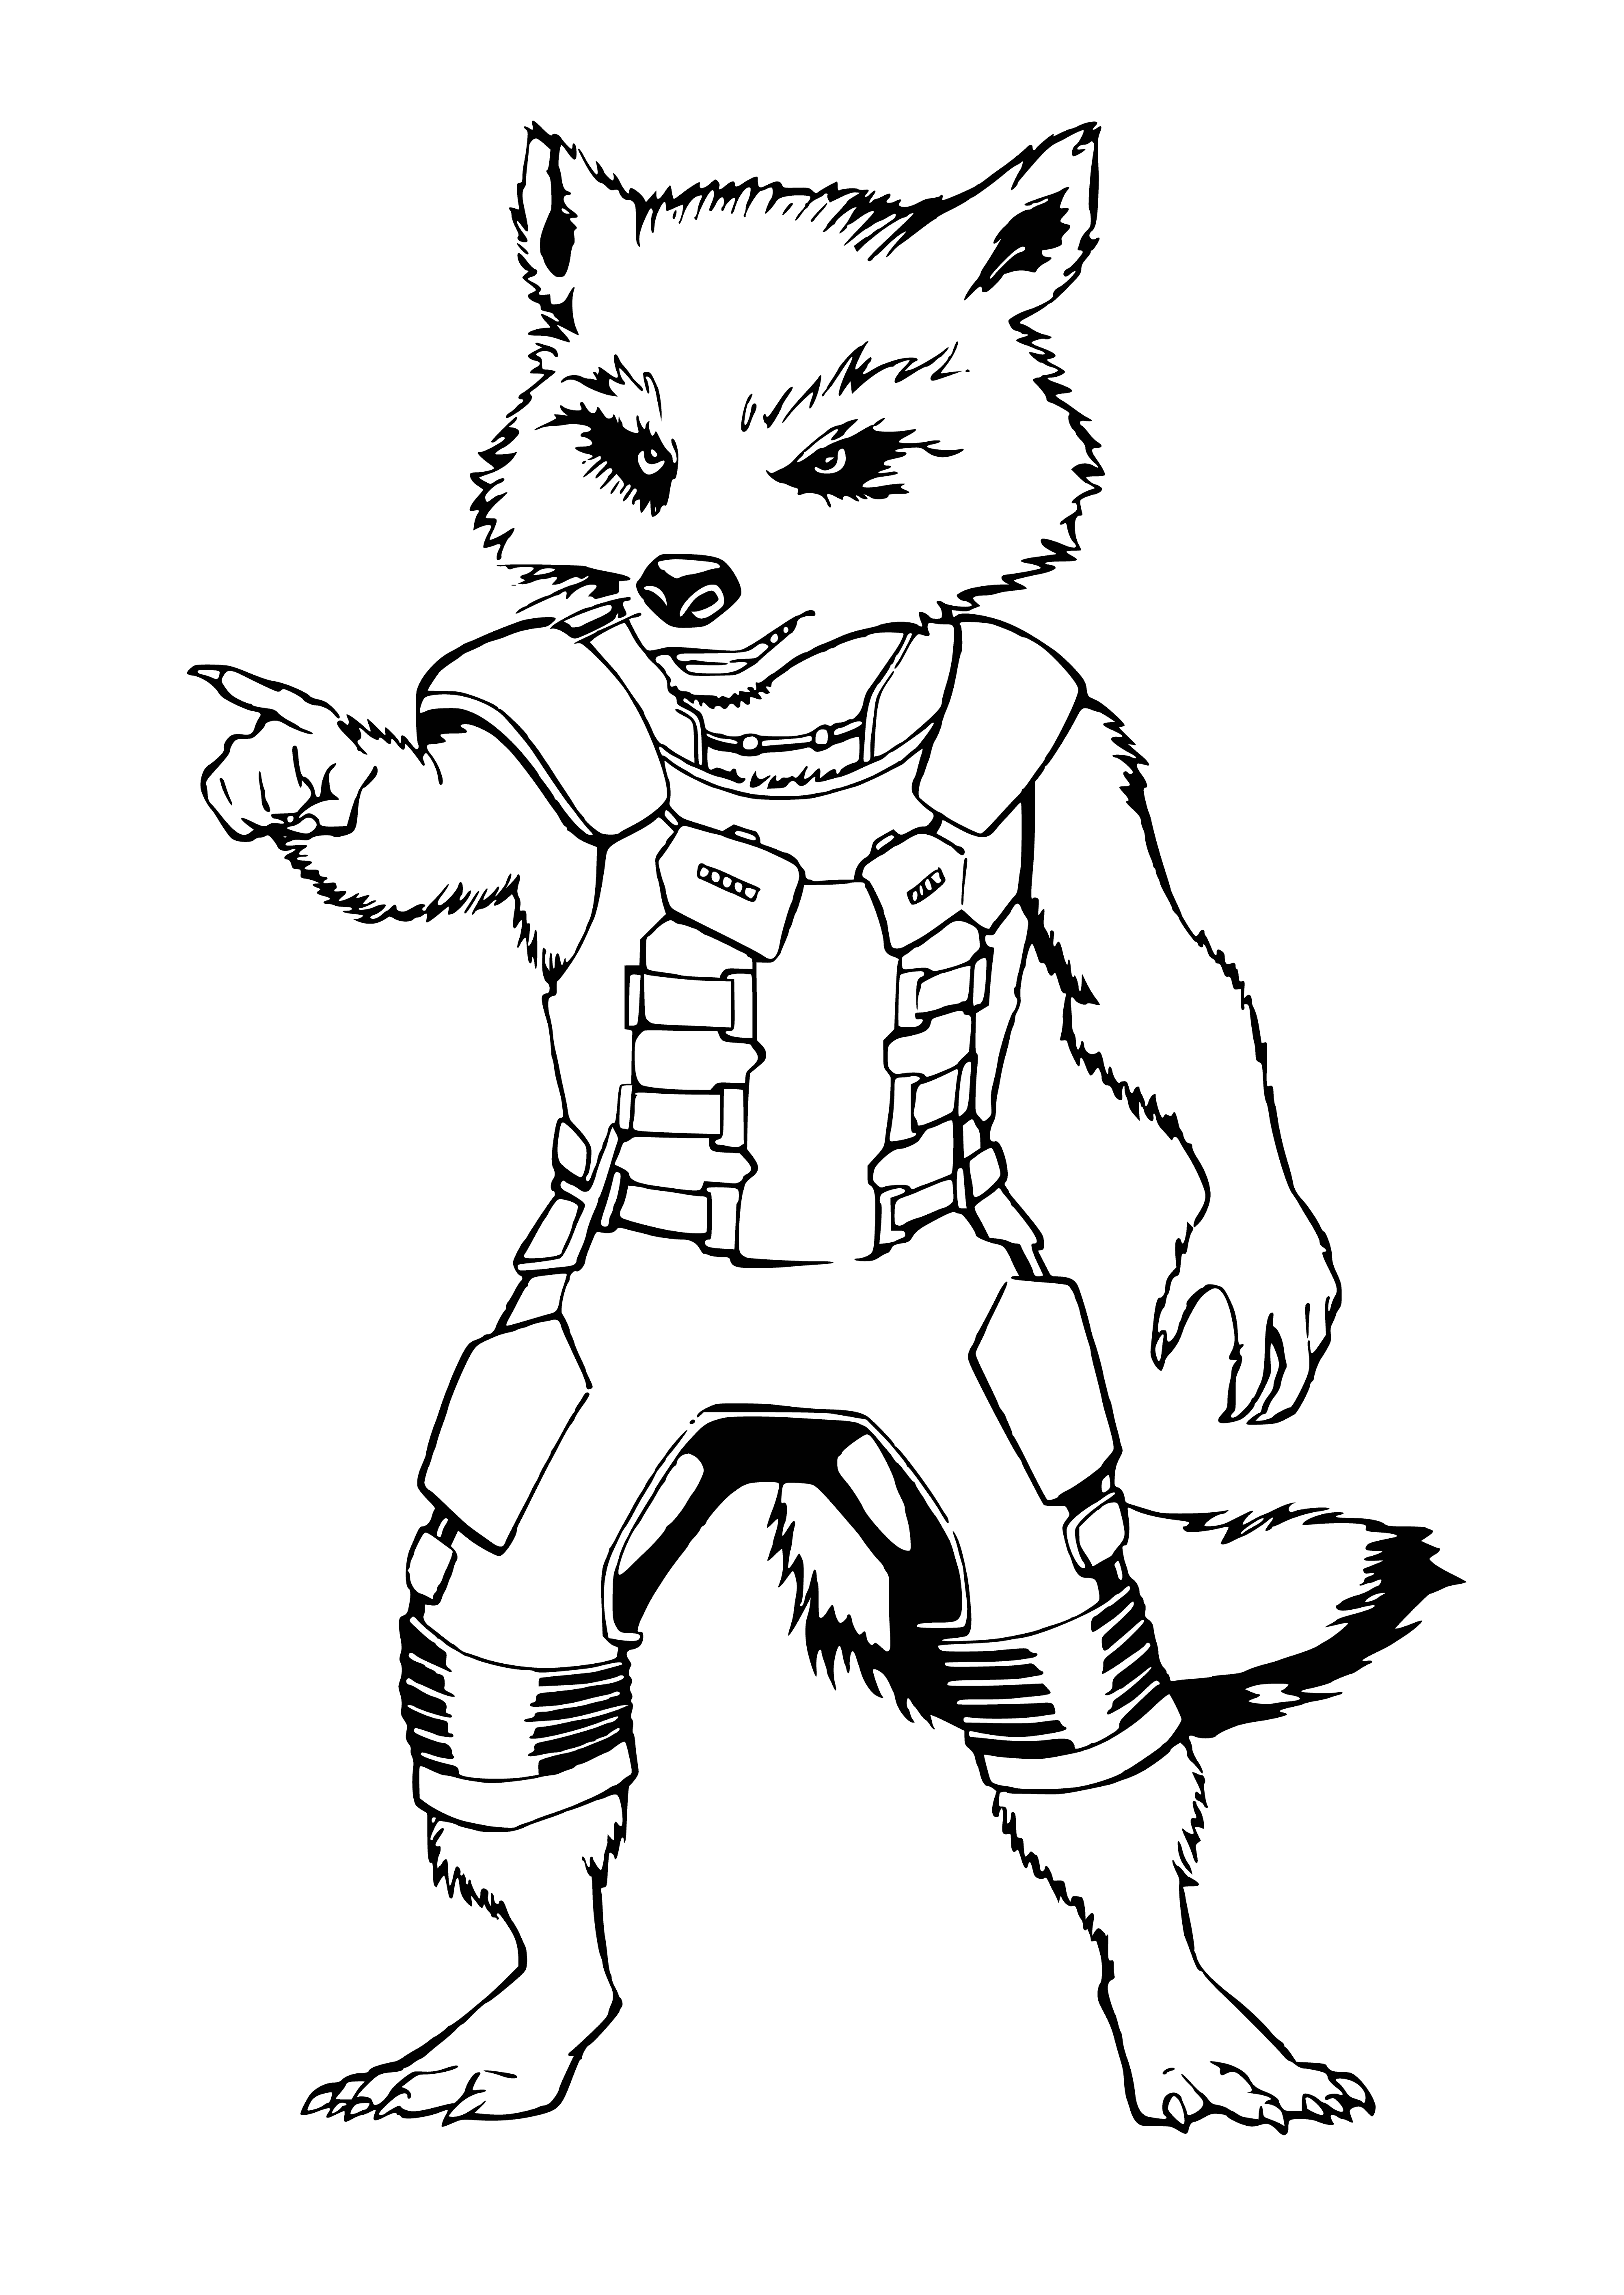 coloring page: Small, furry creature with big head, long tail, pointy ears & eyes closed. Wearing dark blue/silver armor & has gun strapped to back.